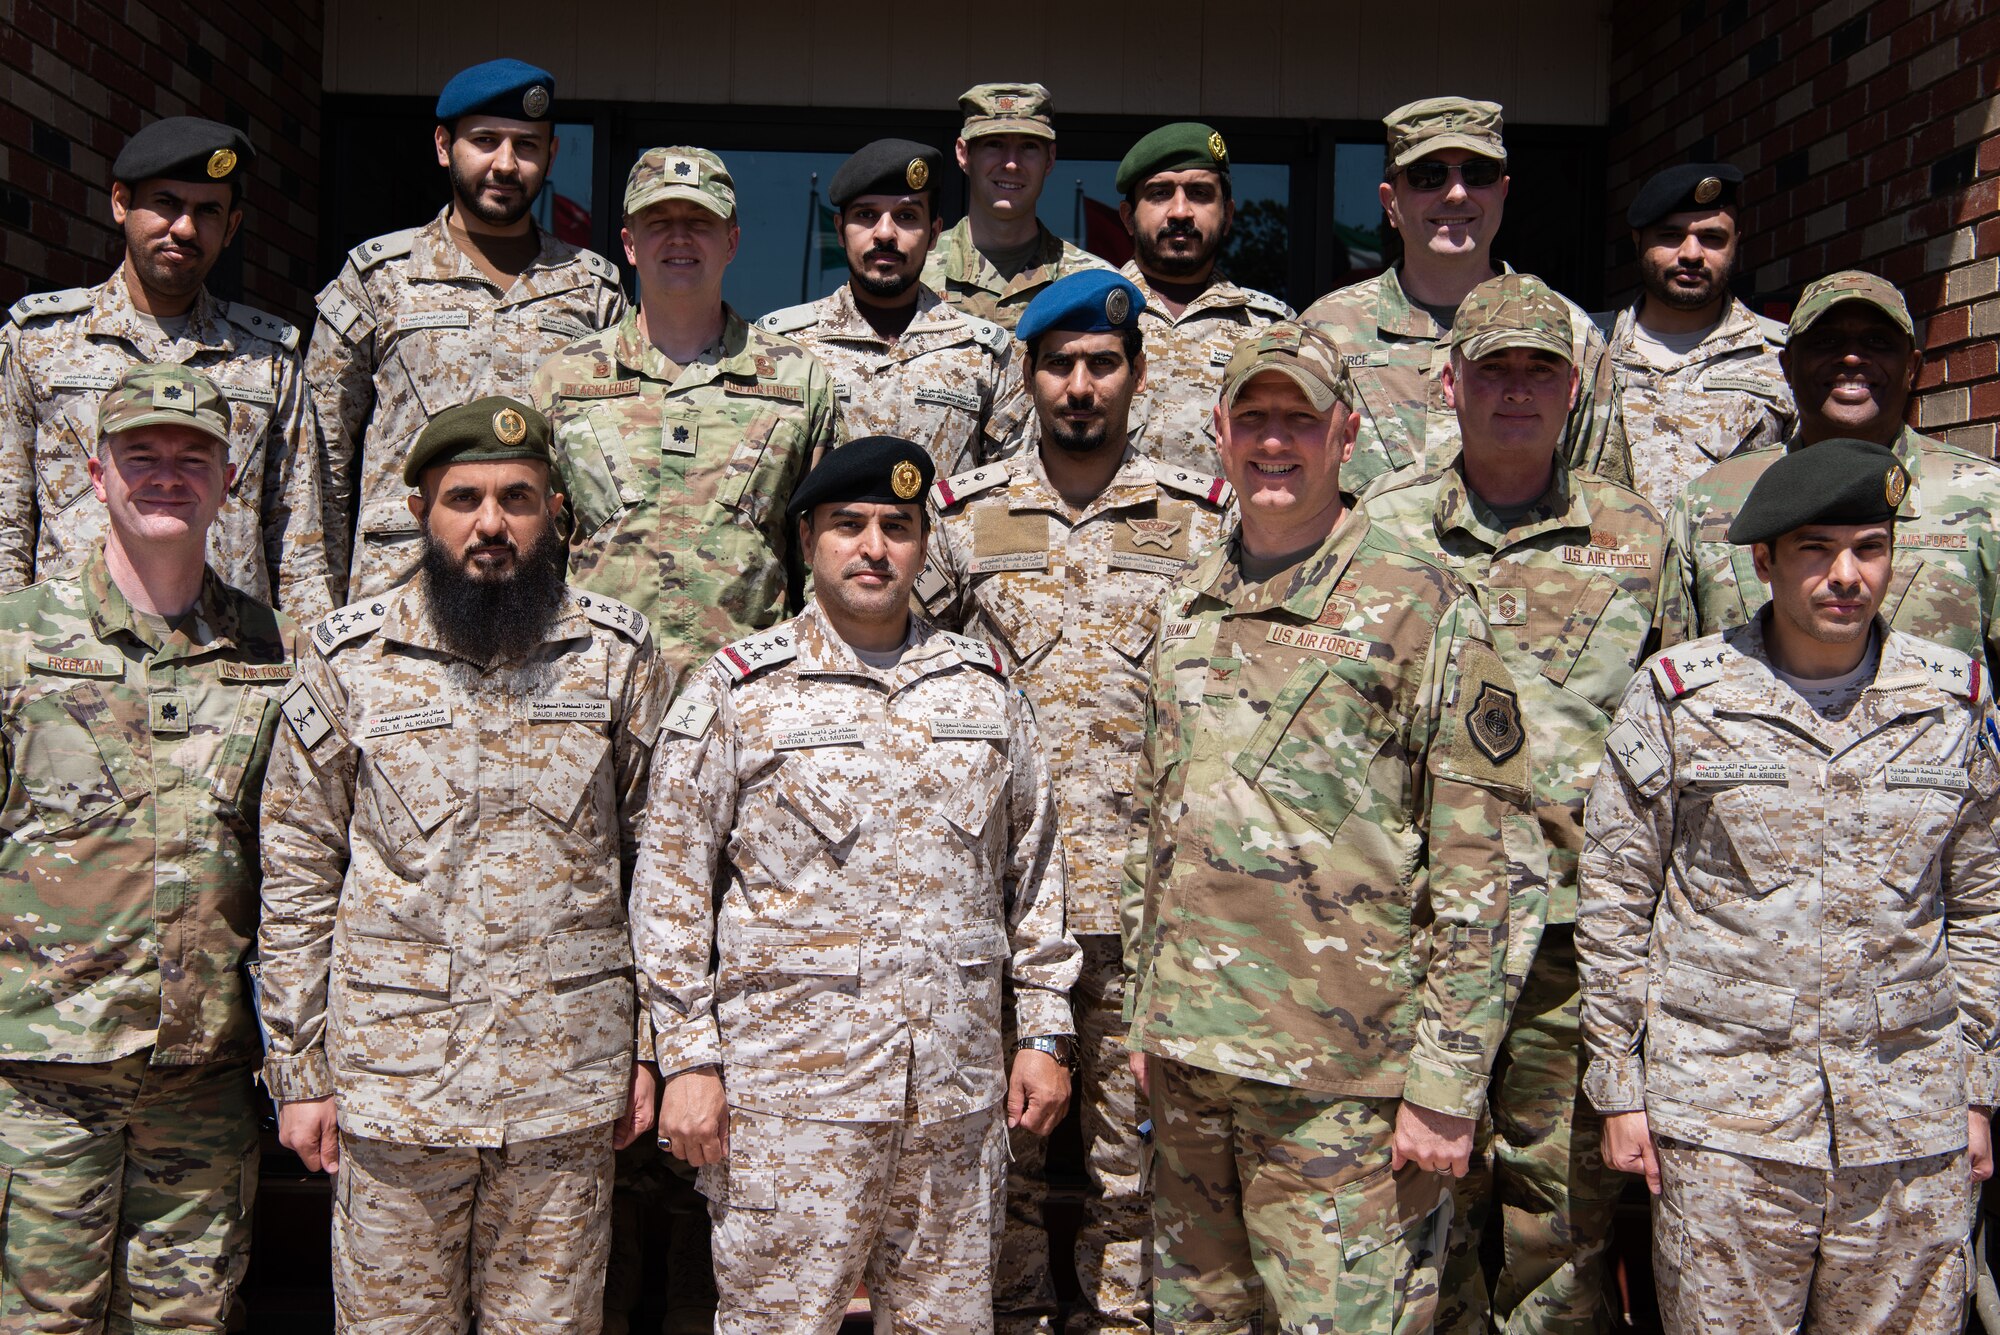 Members of the Royal Saudi Air Forces and members of the 17th Training Wing pose for a photo at Goodfellow Air Force Base, May 18, 2022. Members of the RSAF visited Goodfellow AFB to learn about the joint and coalition forces intelligence, surveillance, and reconnaissance training provided by the 17th TRW. (U.S. Air Force Photo by Senior Airman Michael Bowman)